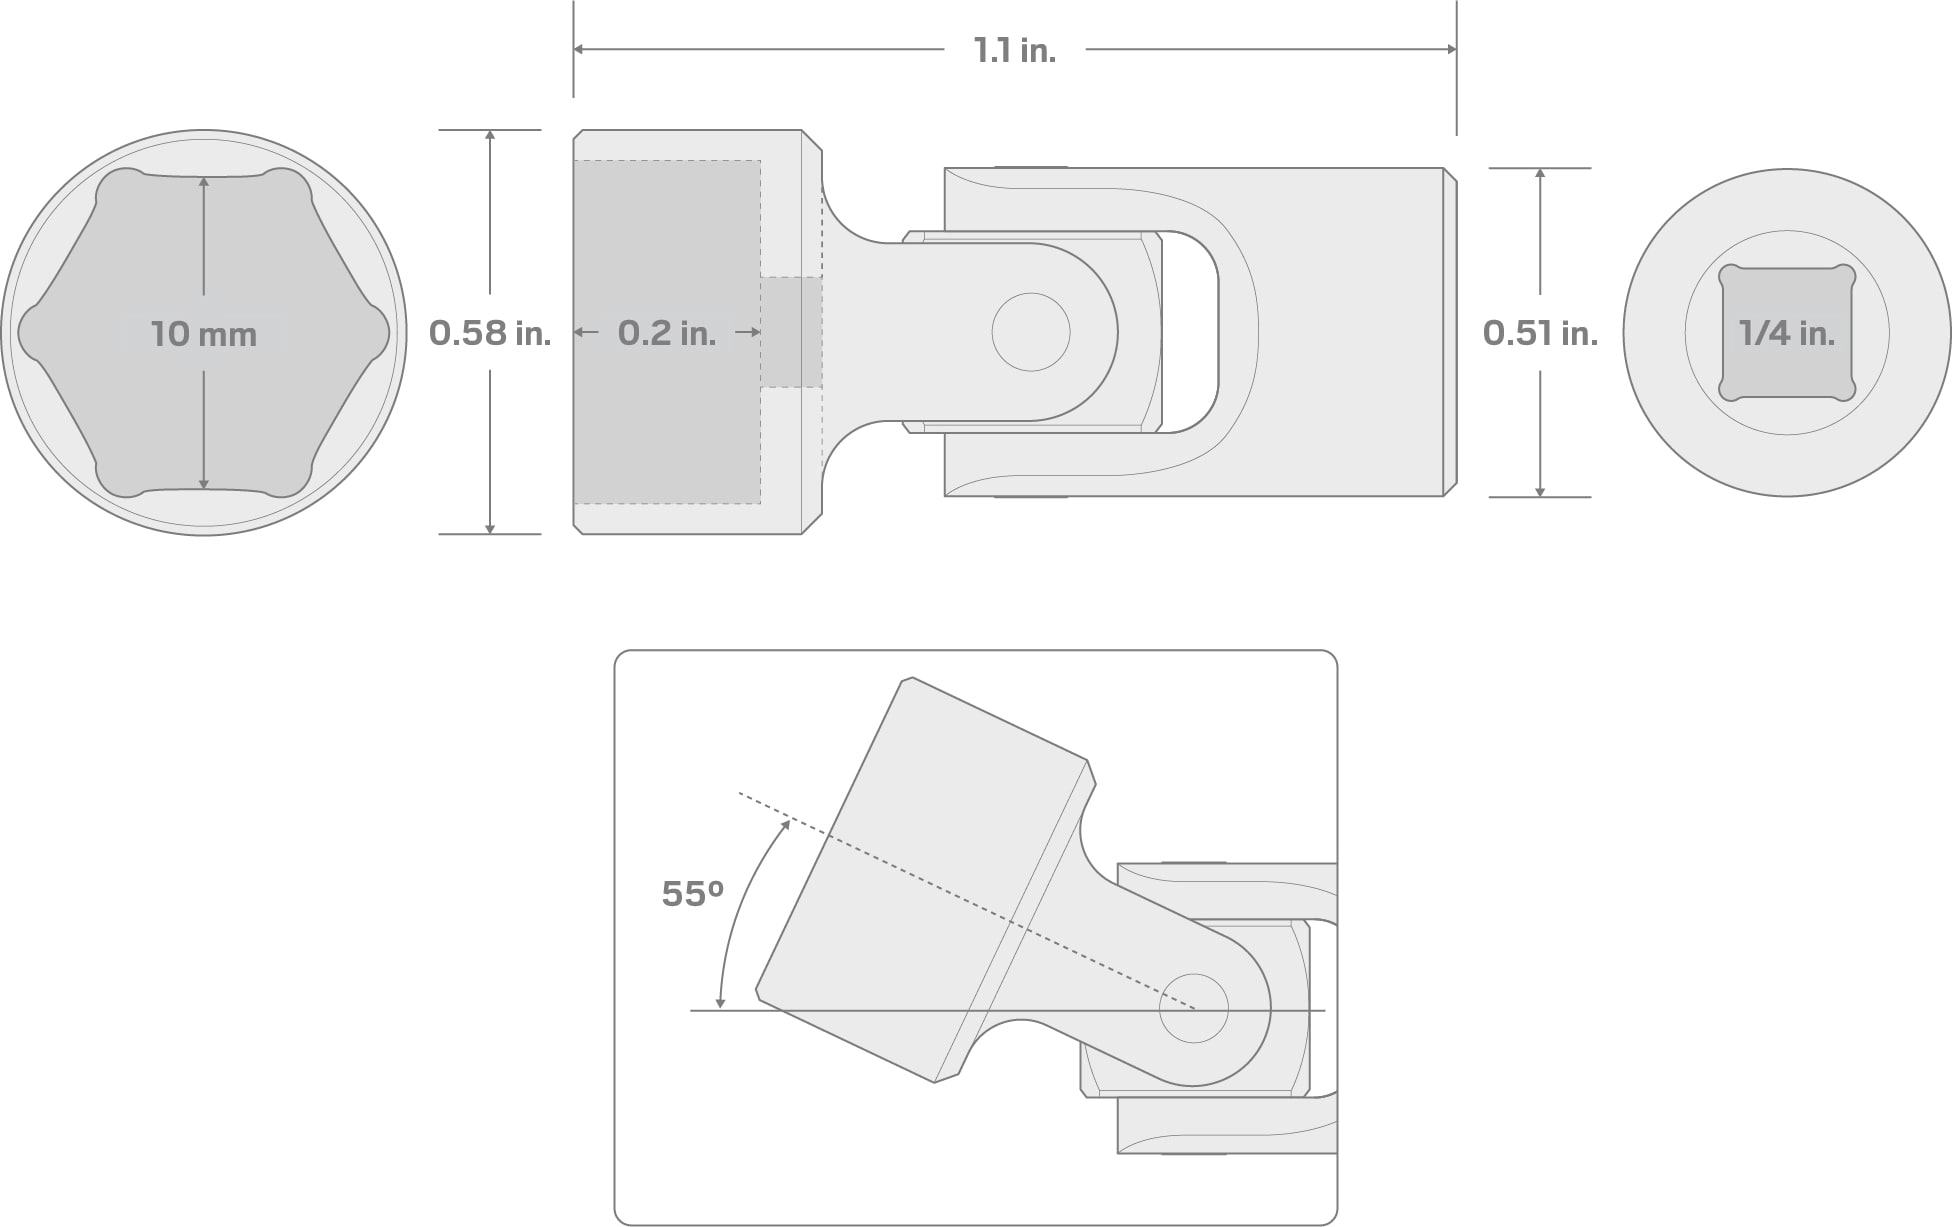 Specs for 1/4 Inch Drive x 10 mm Universal Joint Socket